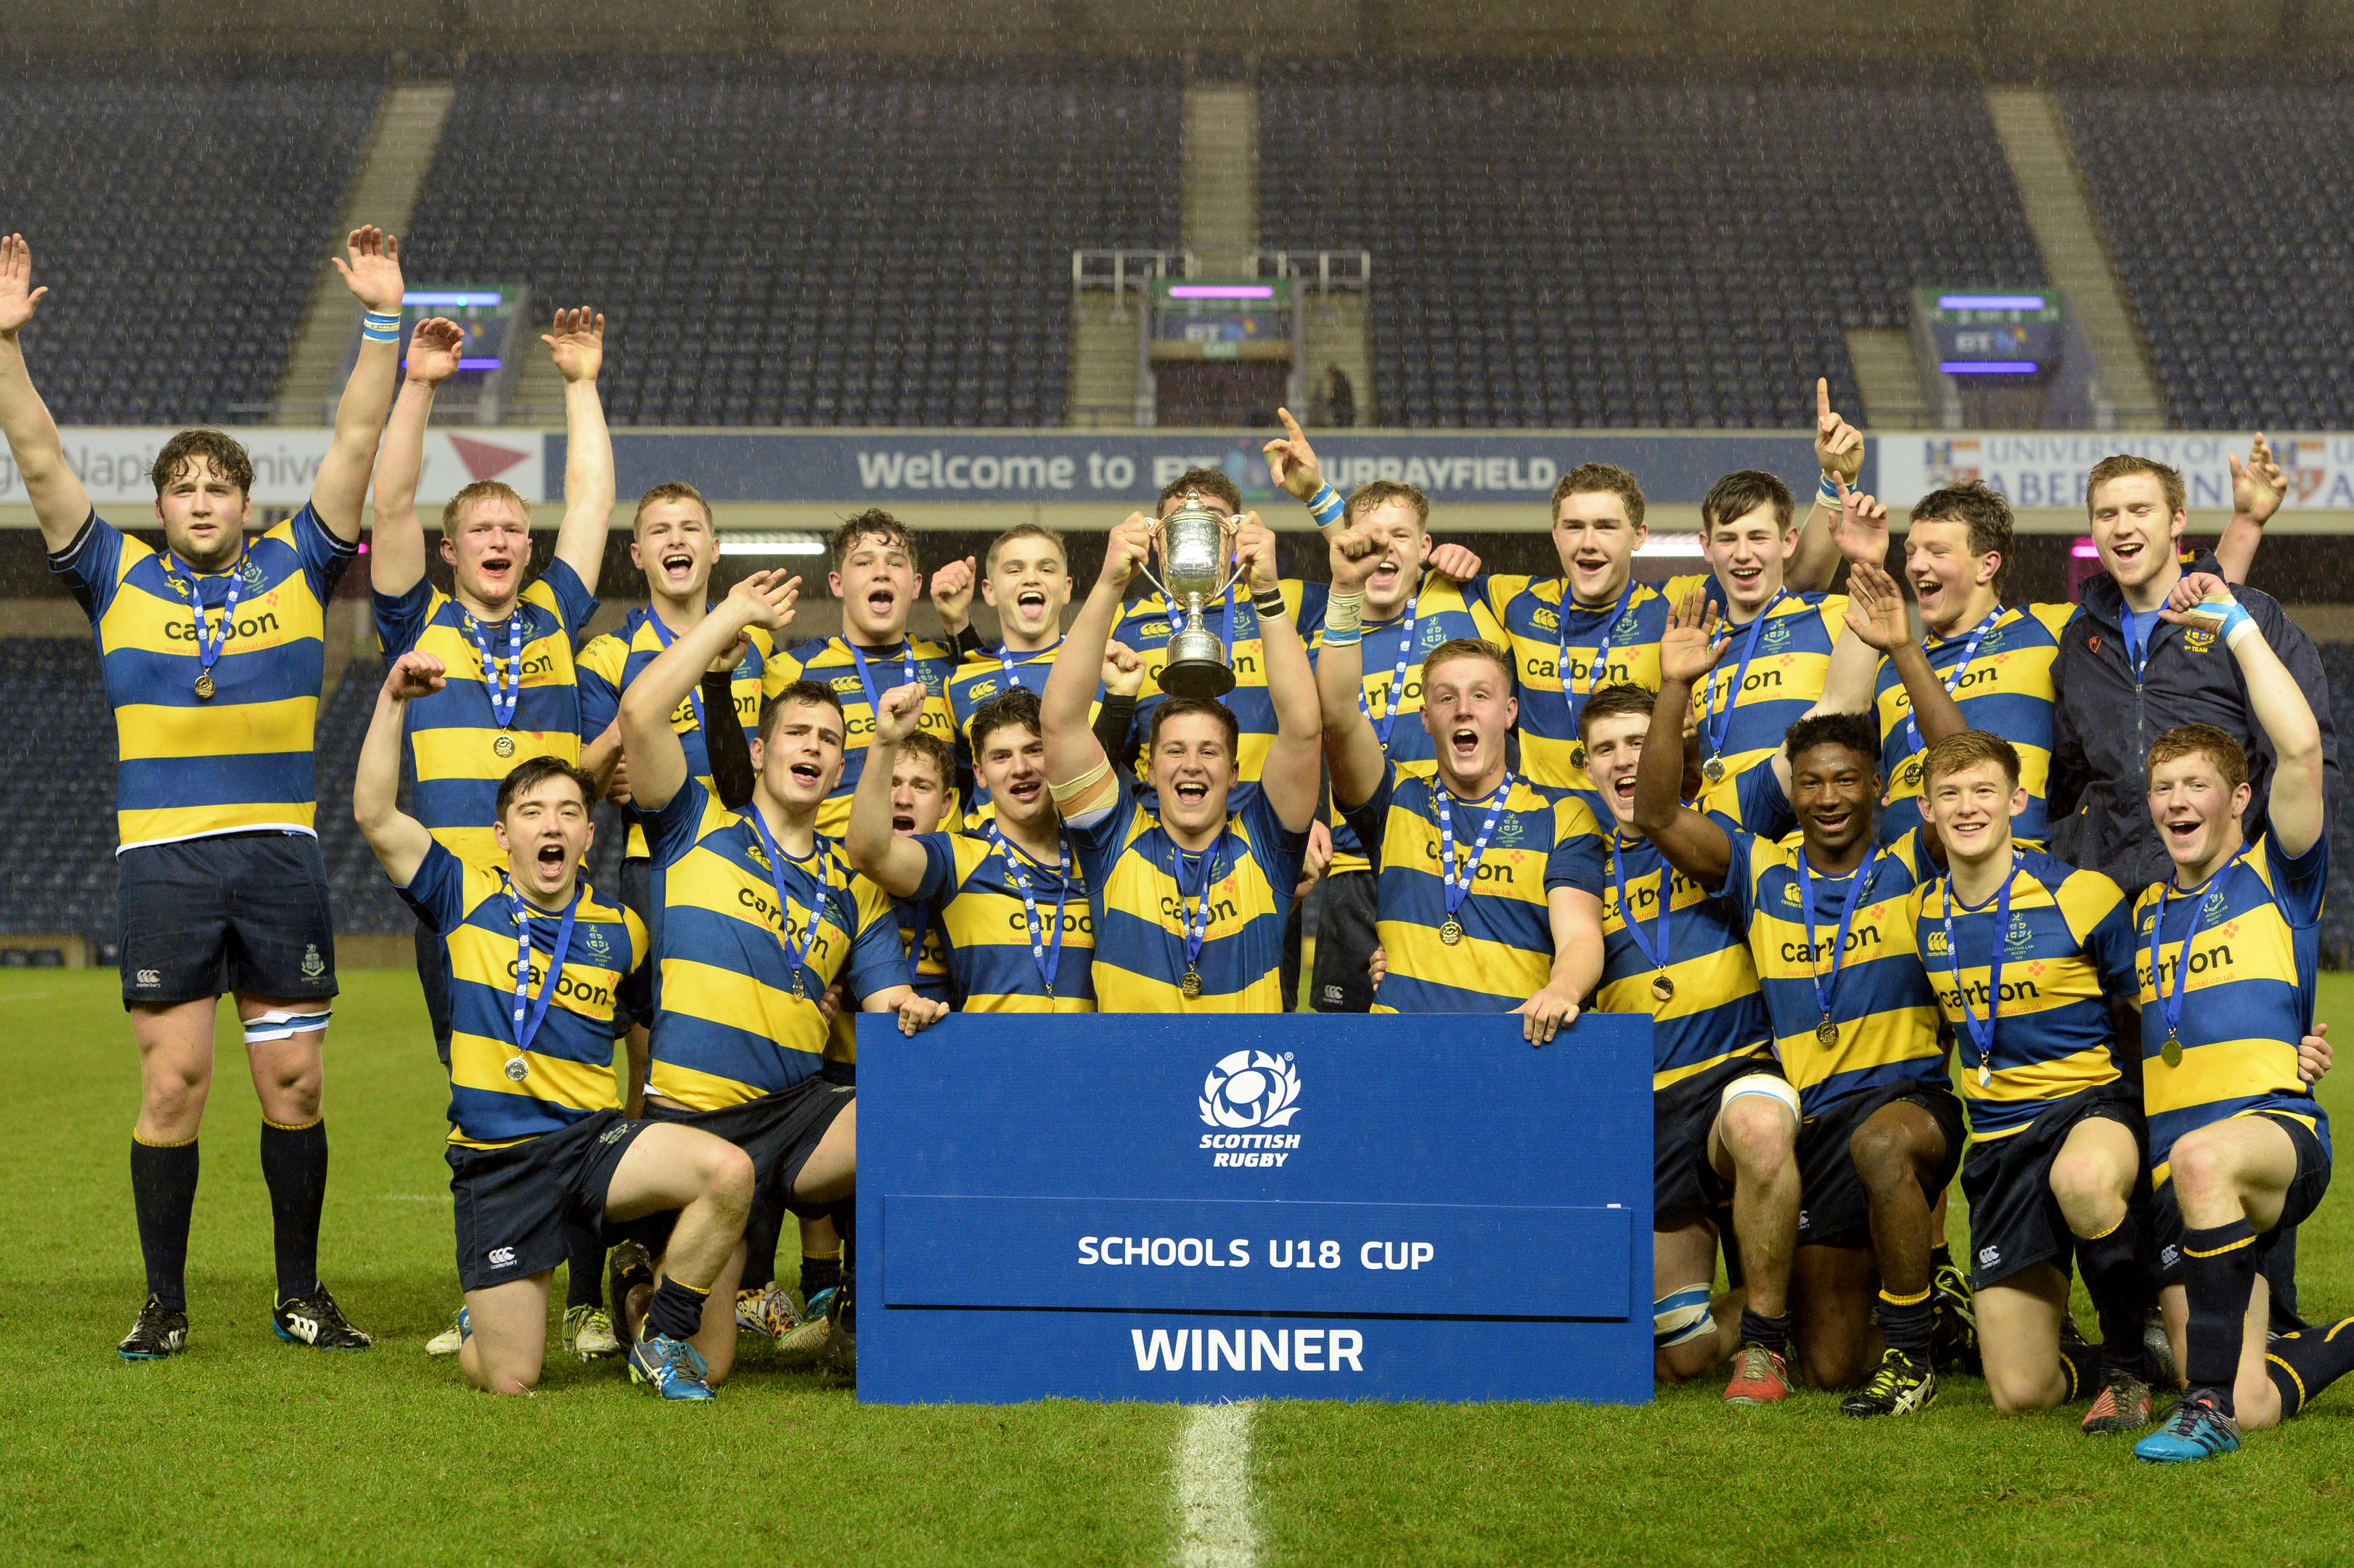 The Strathallan players celebrate their Scottish Schools Cup victory.